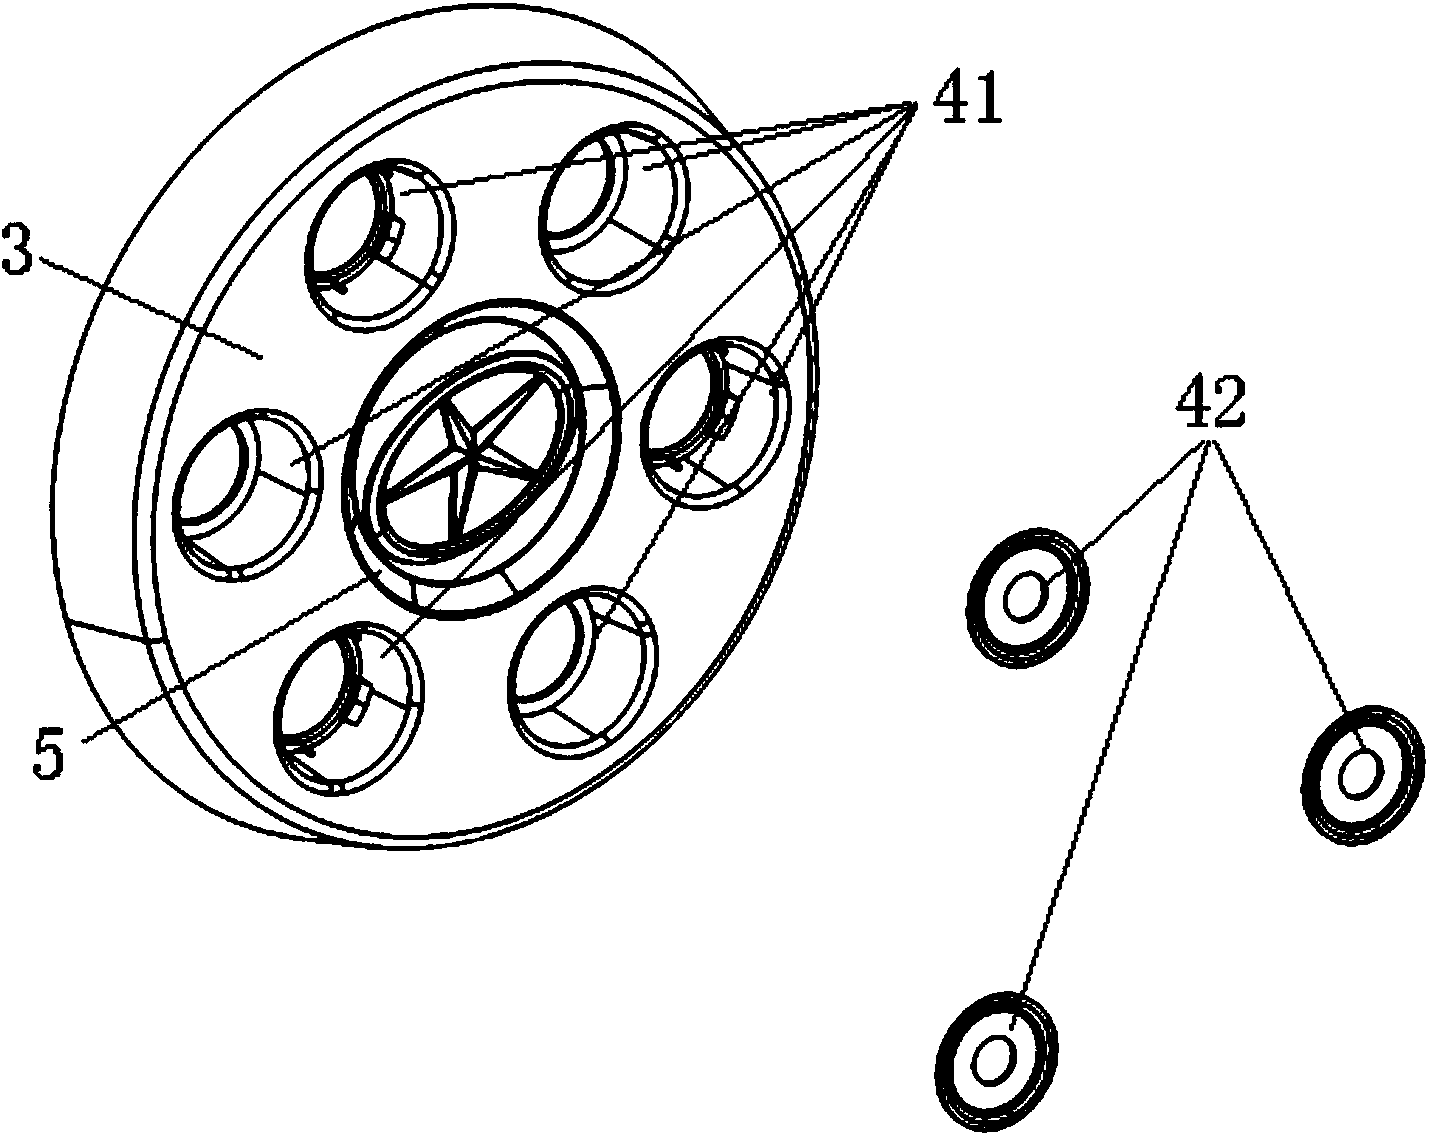 Wheel cover structure